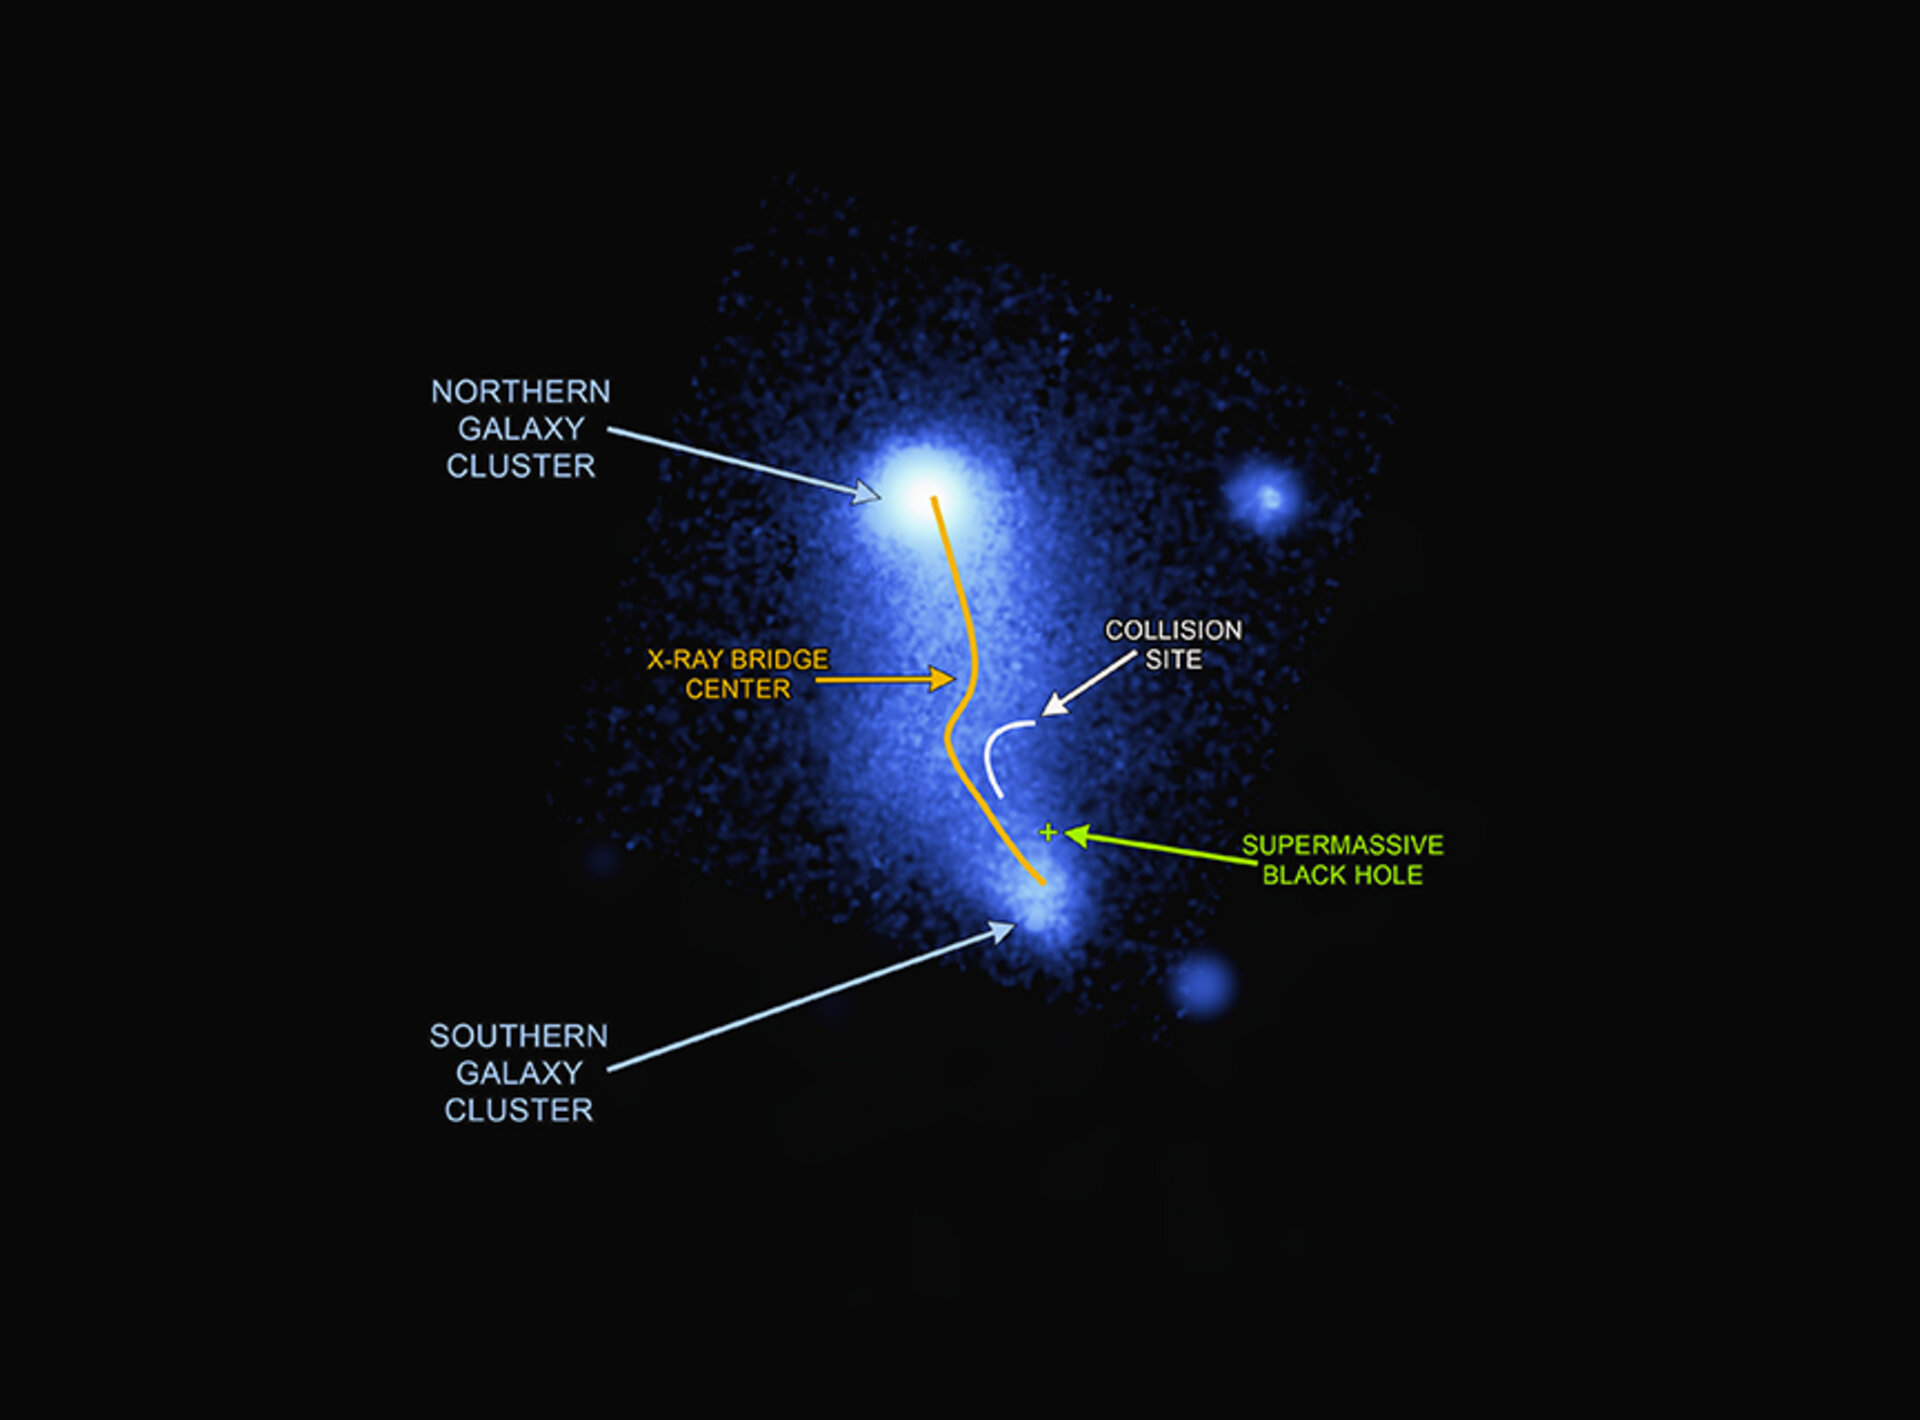 Bridge between galaxy clusters in Abell 2384 – X-ray view, annotated